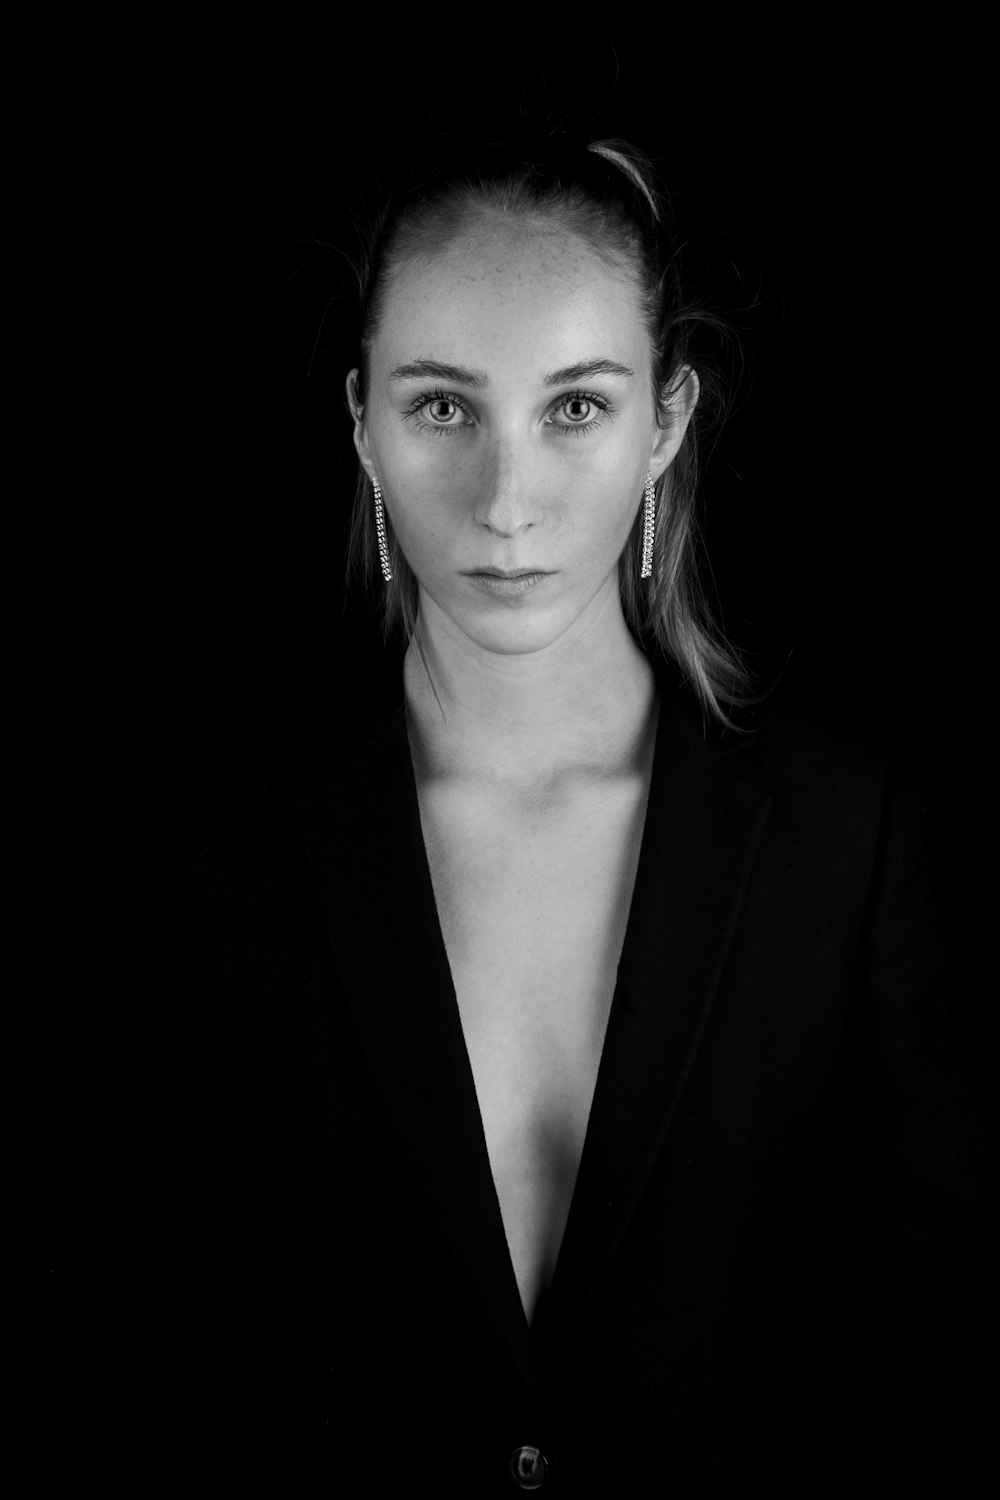 grayscale photography of woman wearing notched lapel suit jacket looking straight